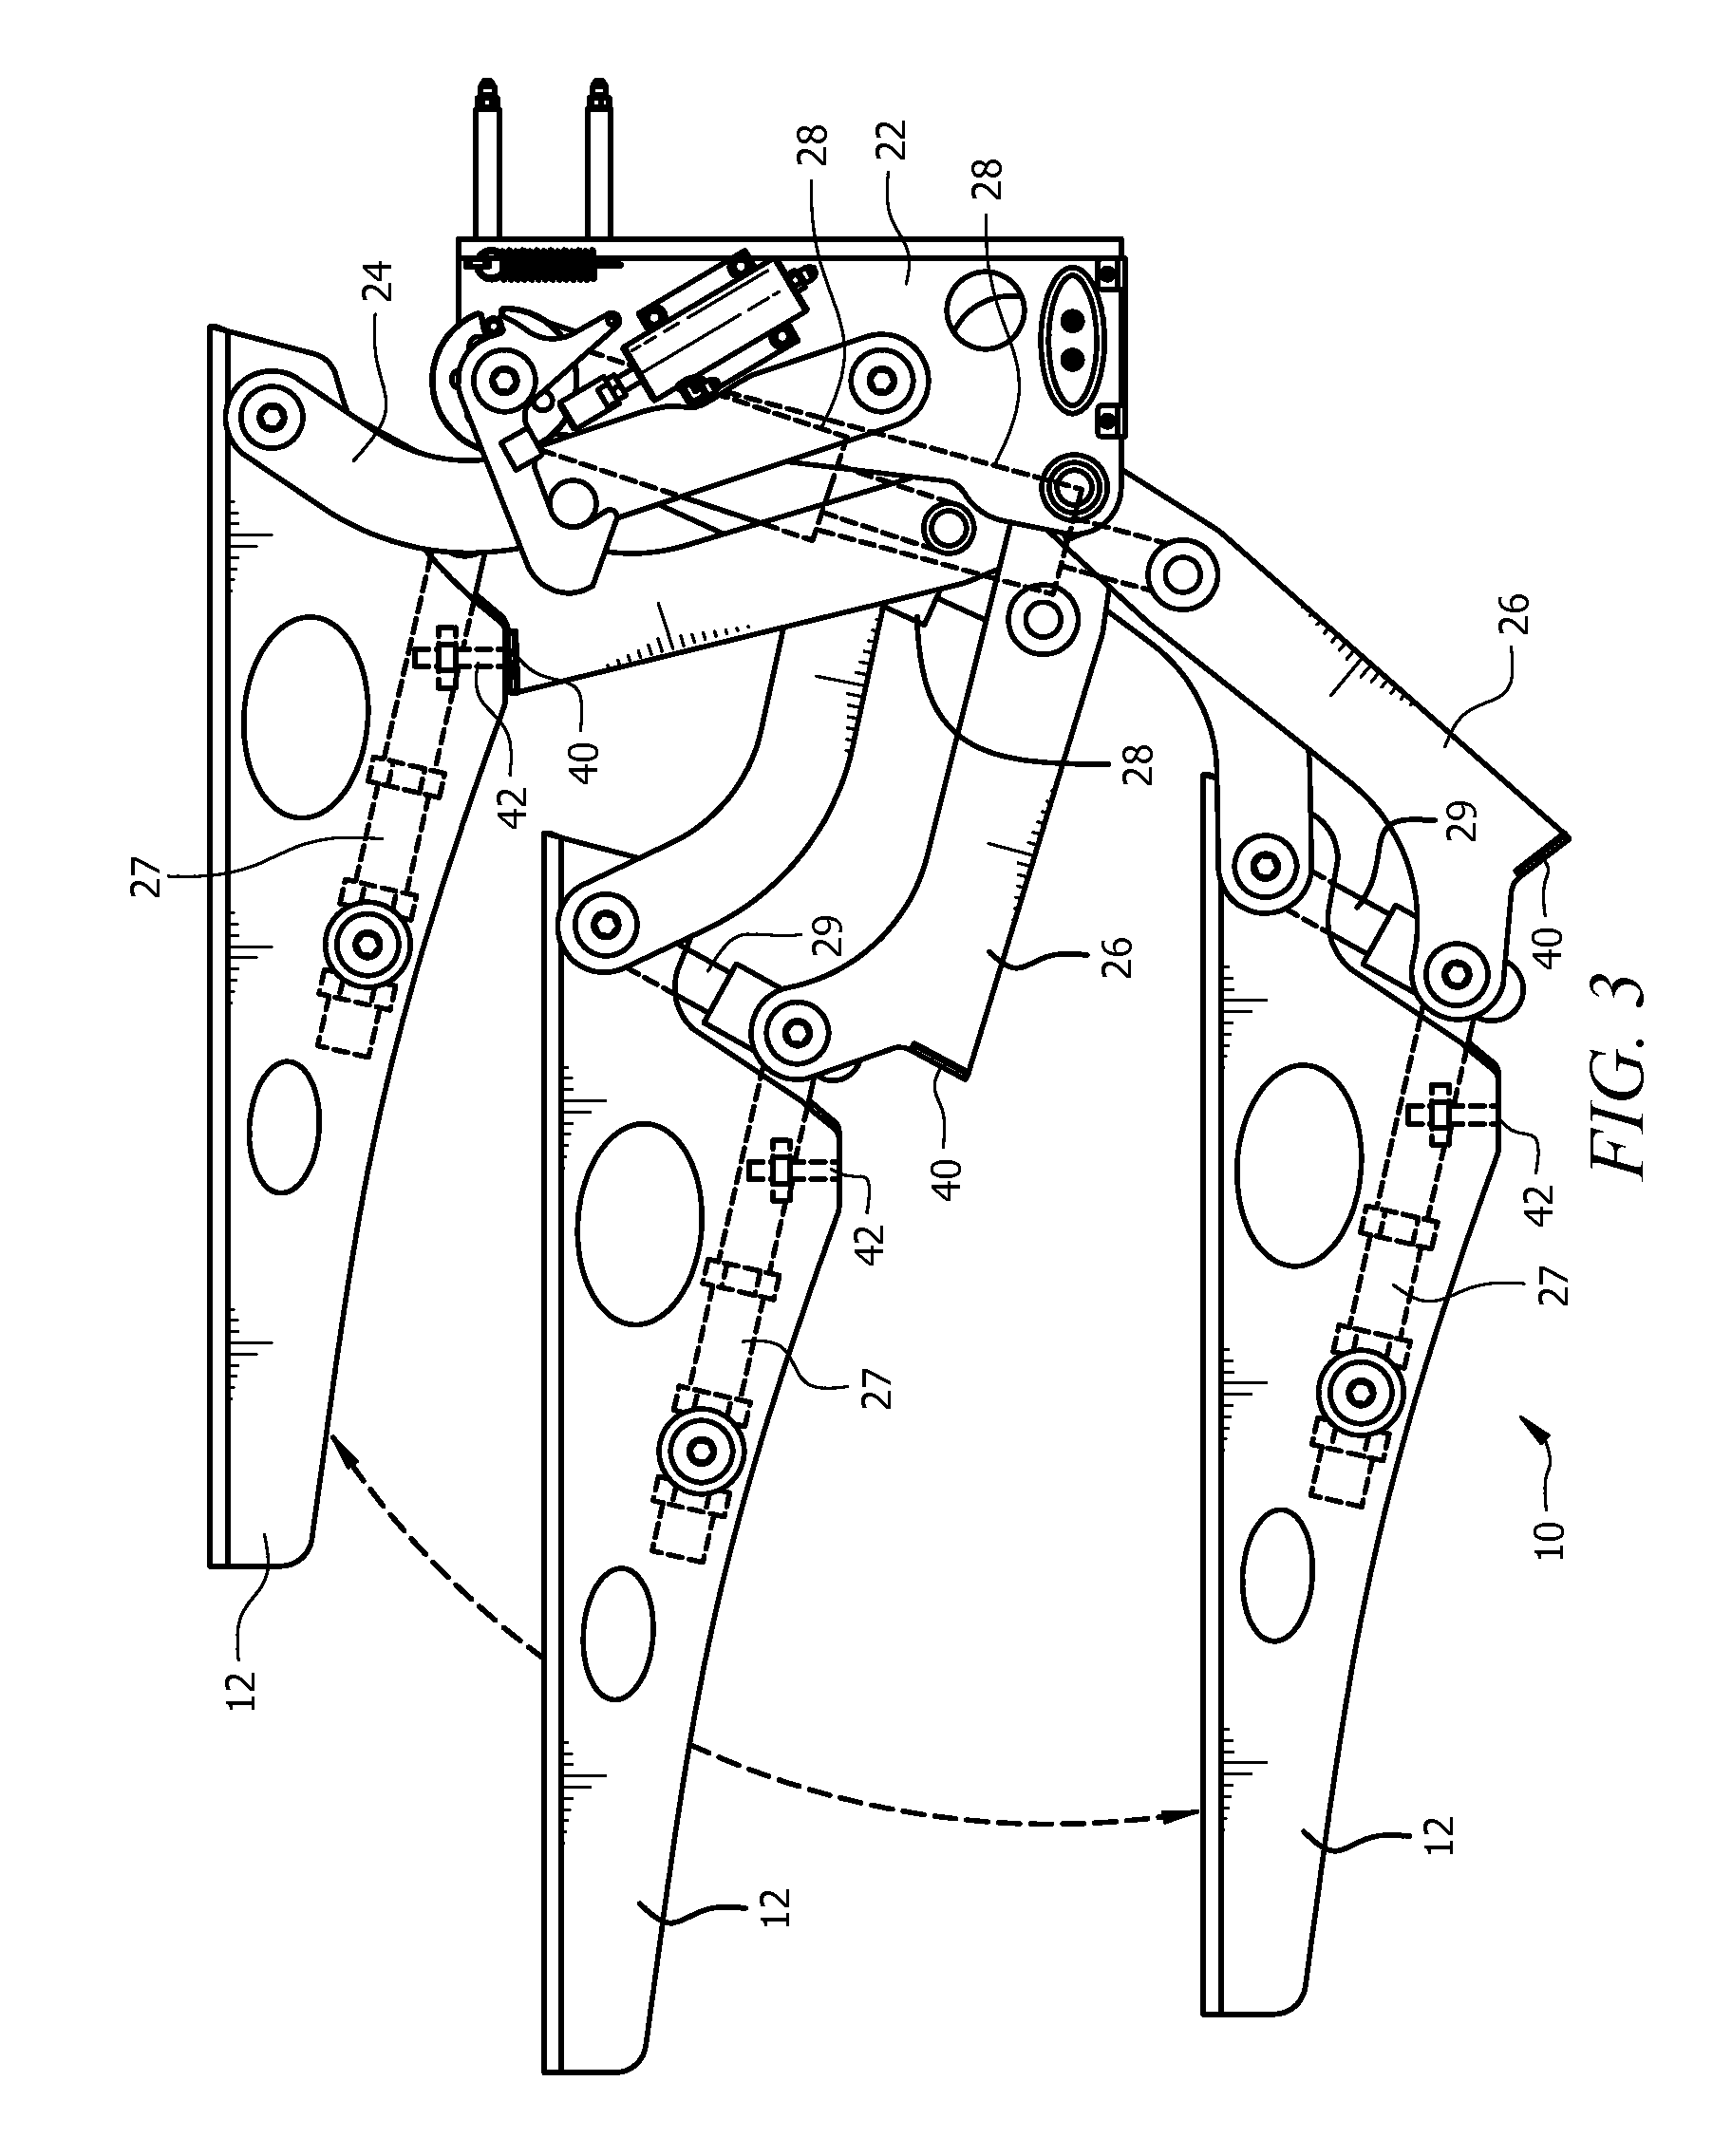 Lift mechanism for added stability for a swim platform of a boat